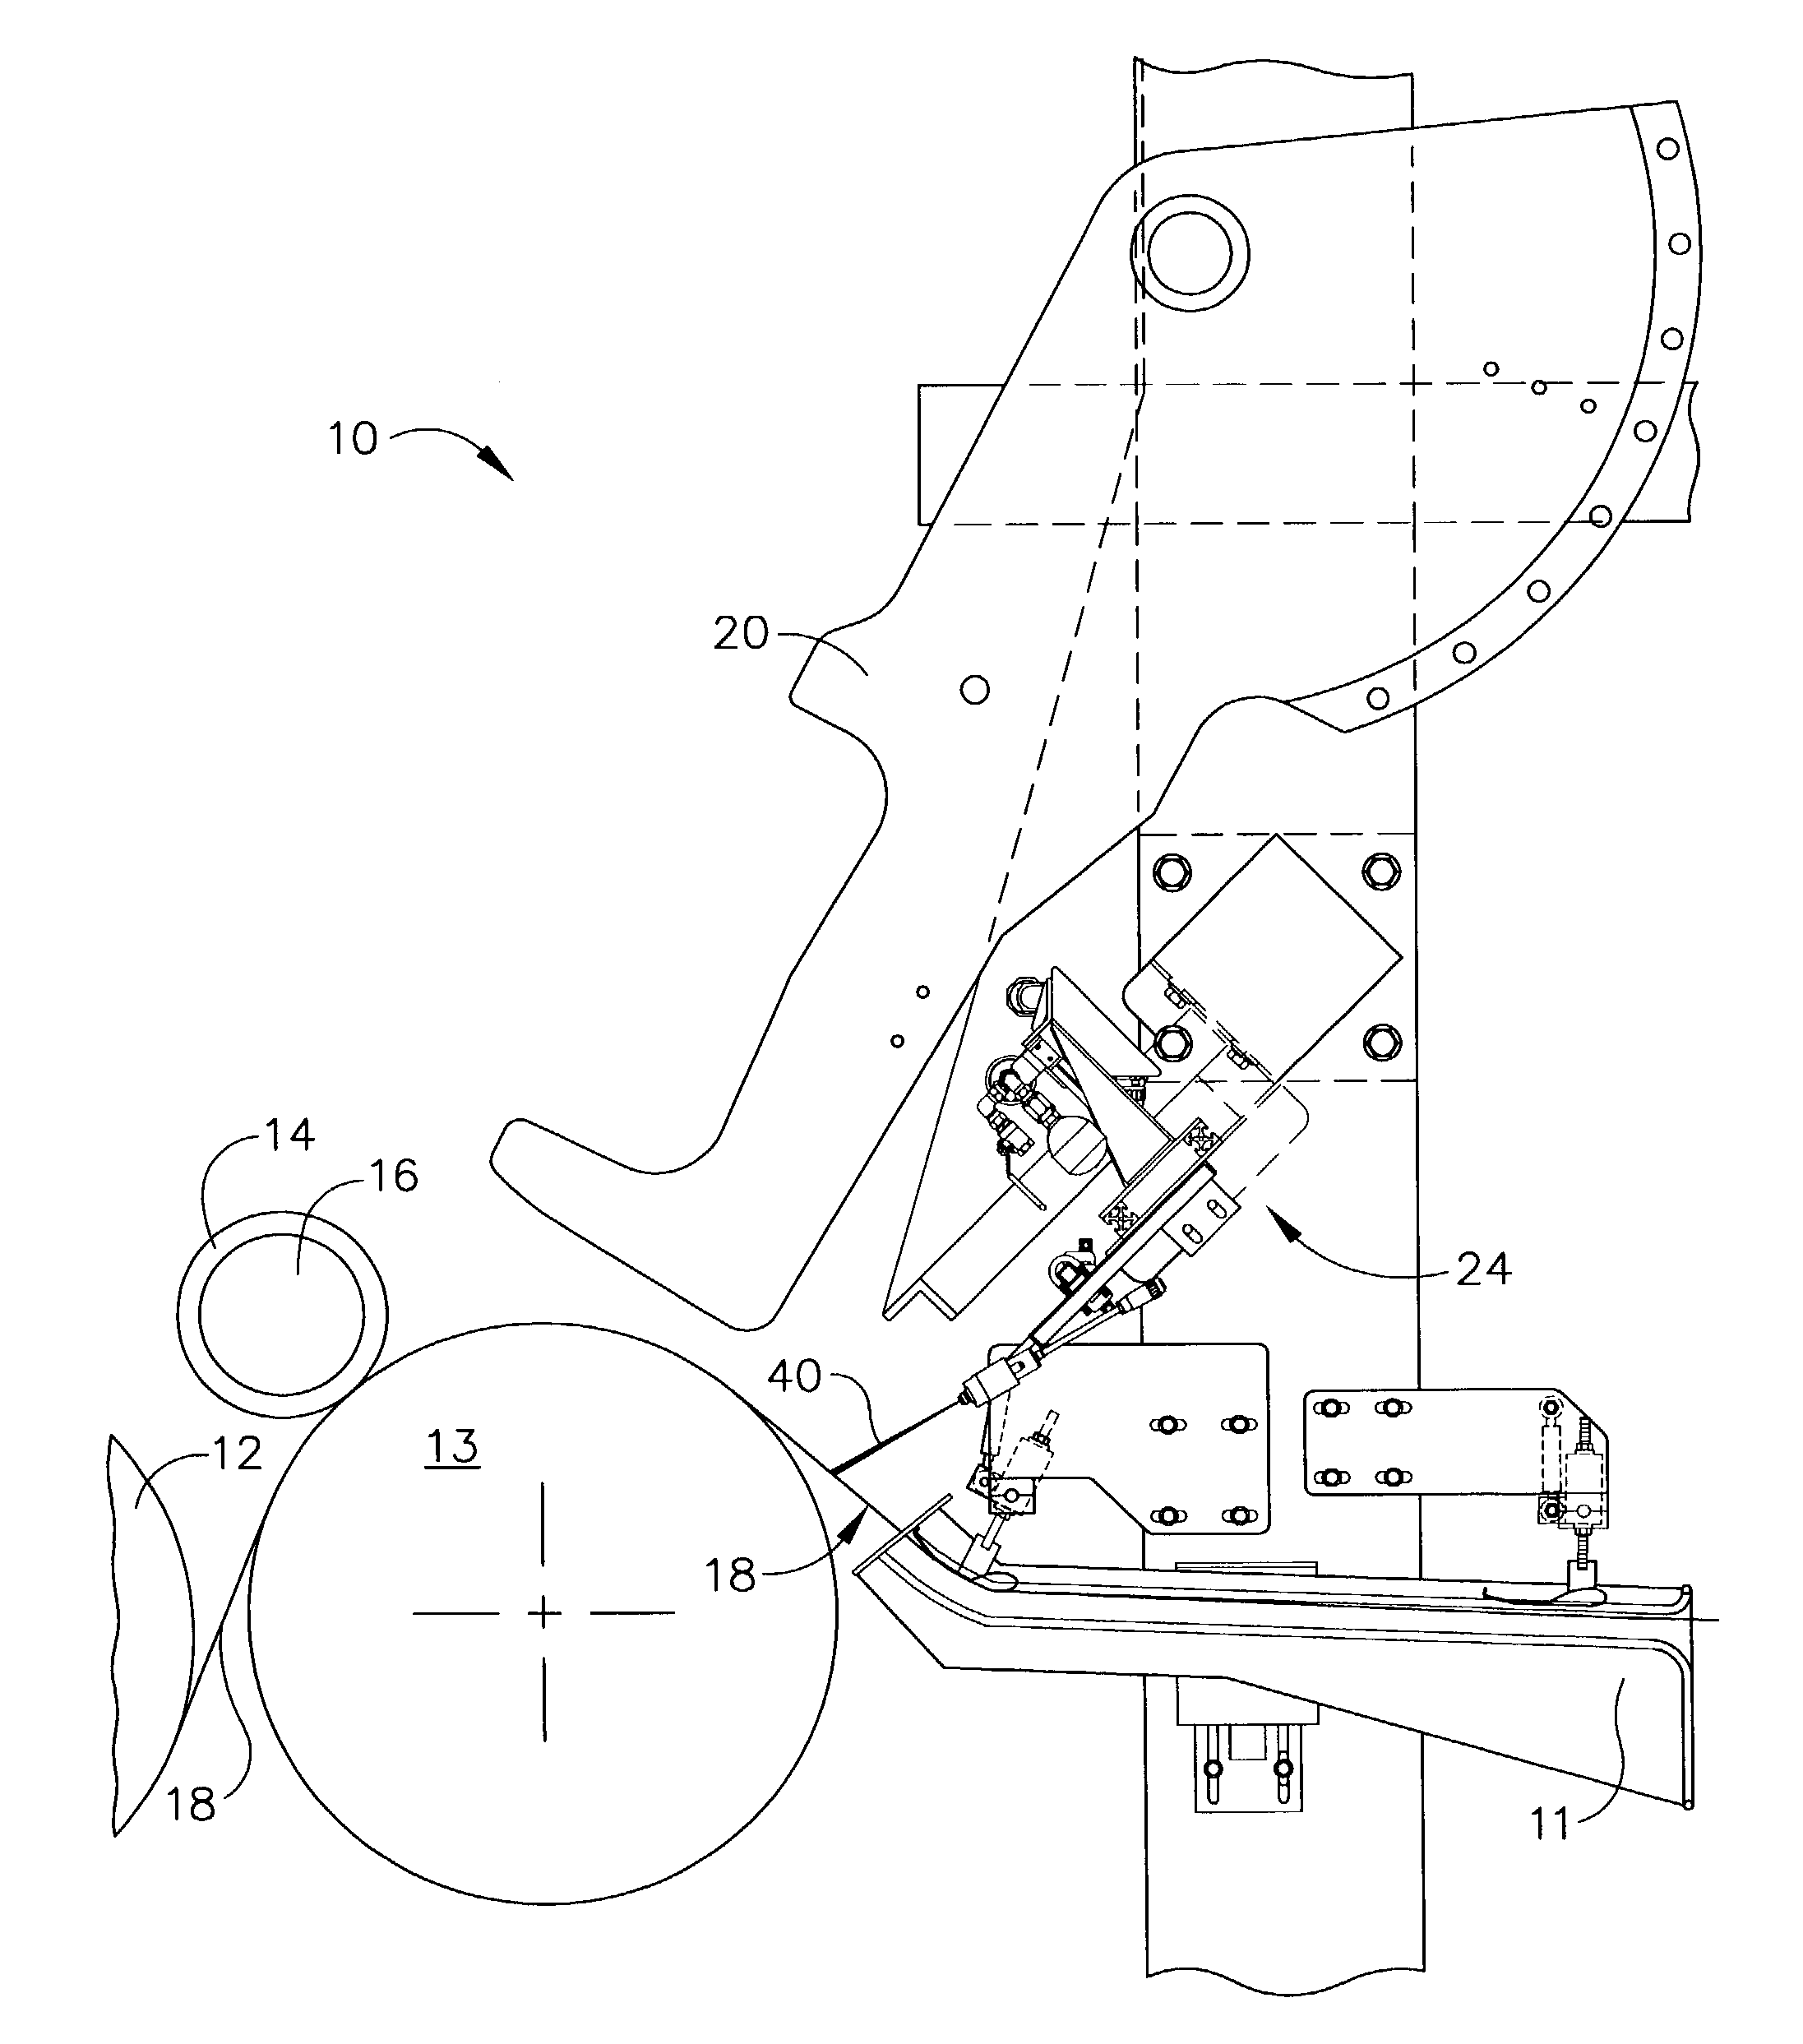 Tissue reel transfer device and method